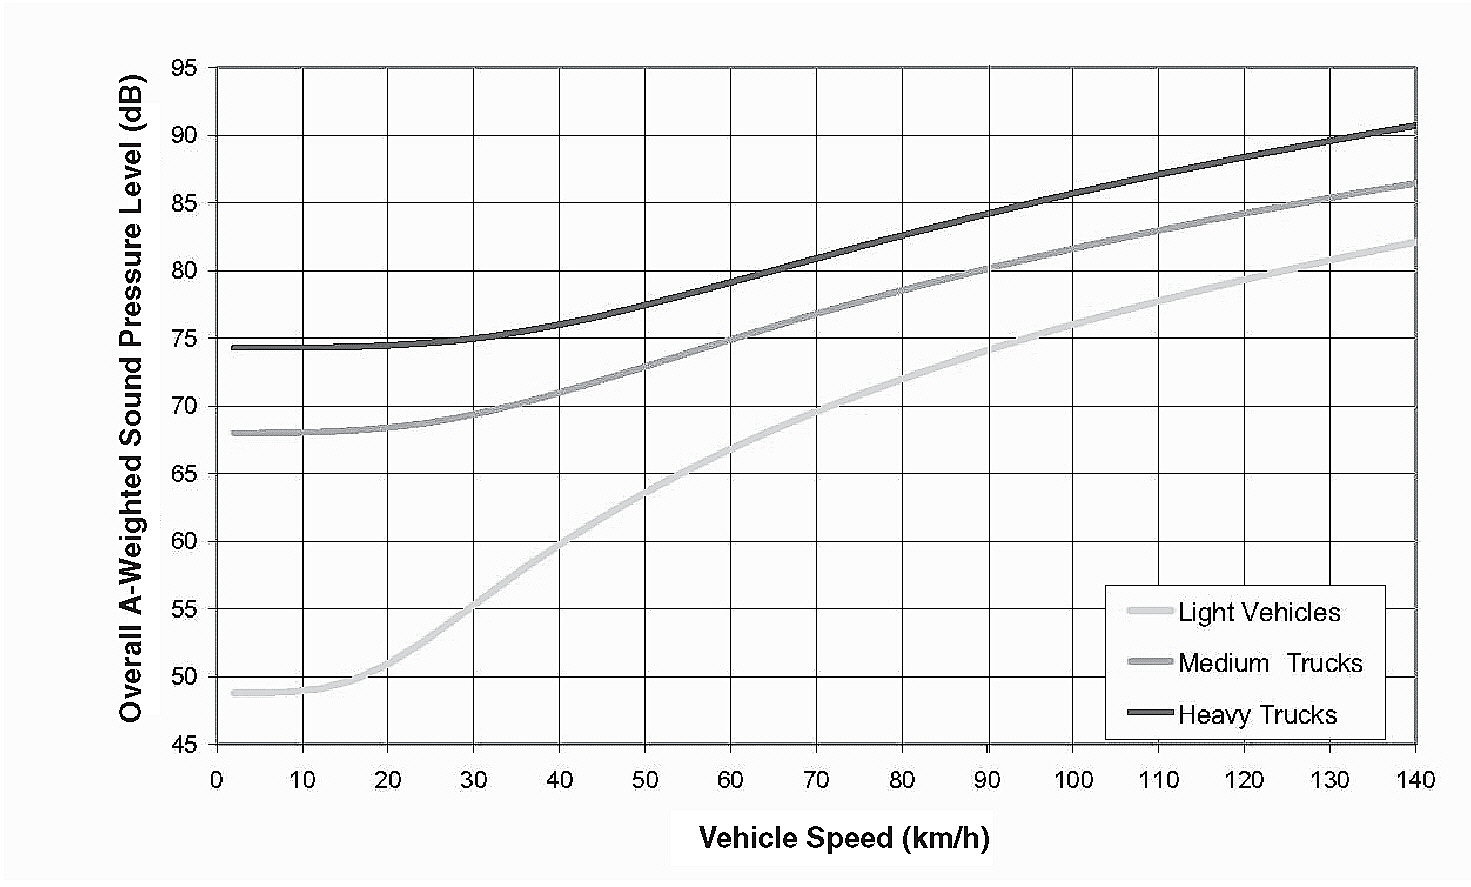 FIGURE 5-16 U.S. average pass-by noise levels under cruise conditions for light vehicles, medium trucks, and heavy trucks measured at a distance of 15 meters. Source: Fleming et al. (1996).